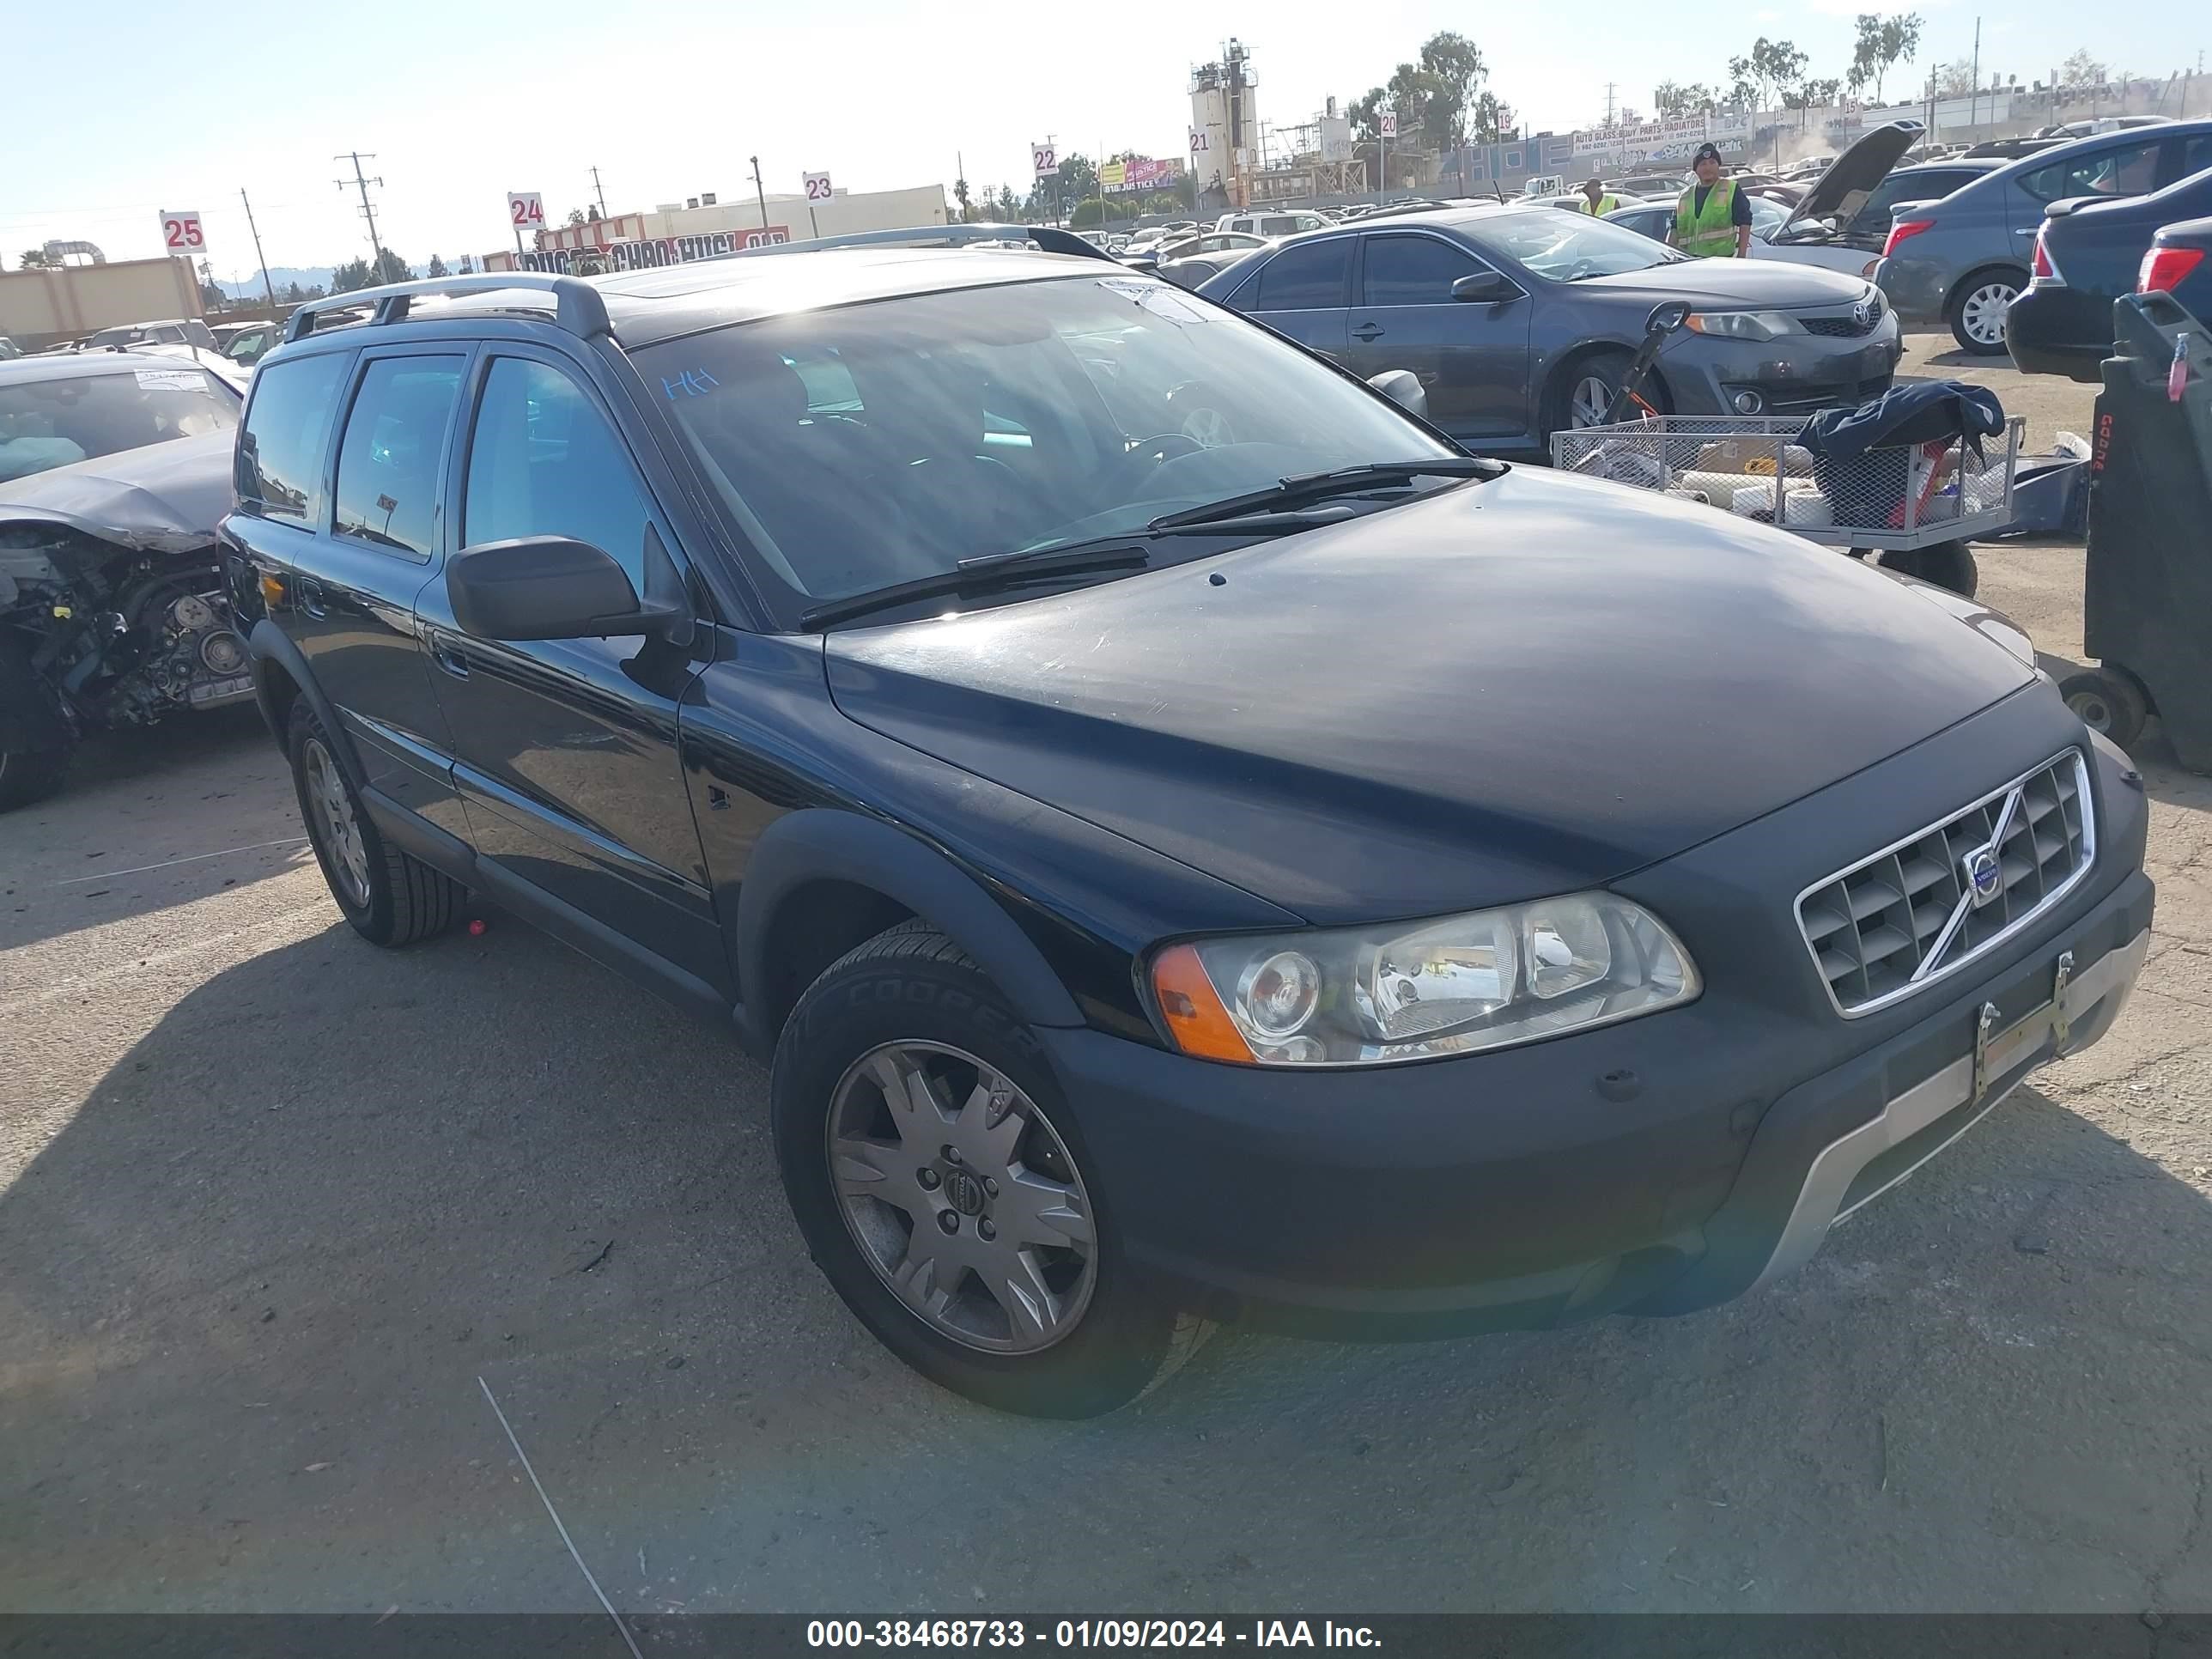 vin: YV4SZ592561231962 YV4SZ592561231962 2006 volvo xc70 2500 for Sale in 91605, 7245 Laurel Canyon Blvd, Los Angeles, USA